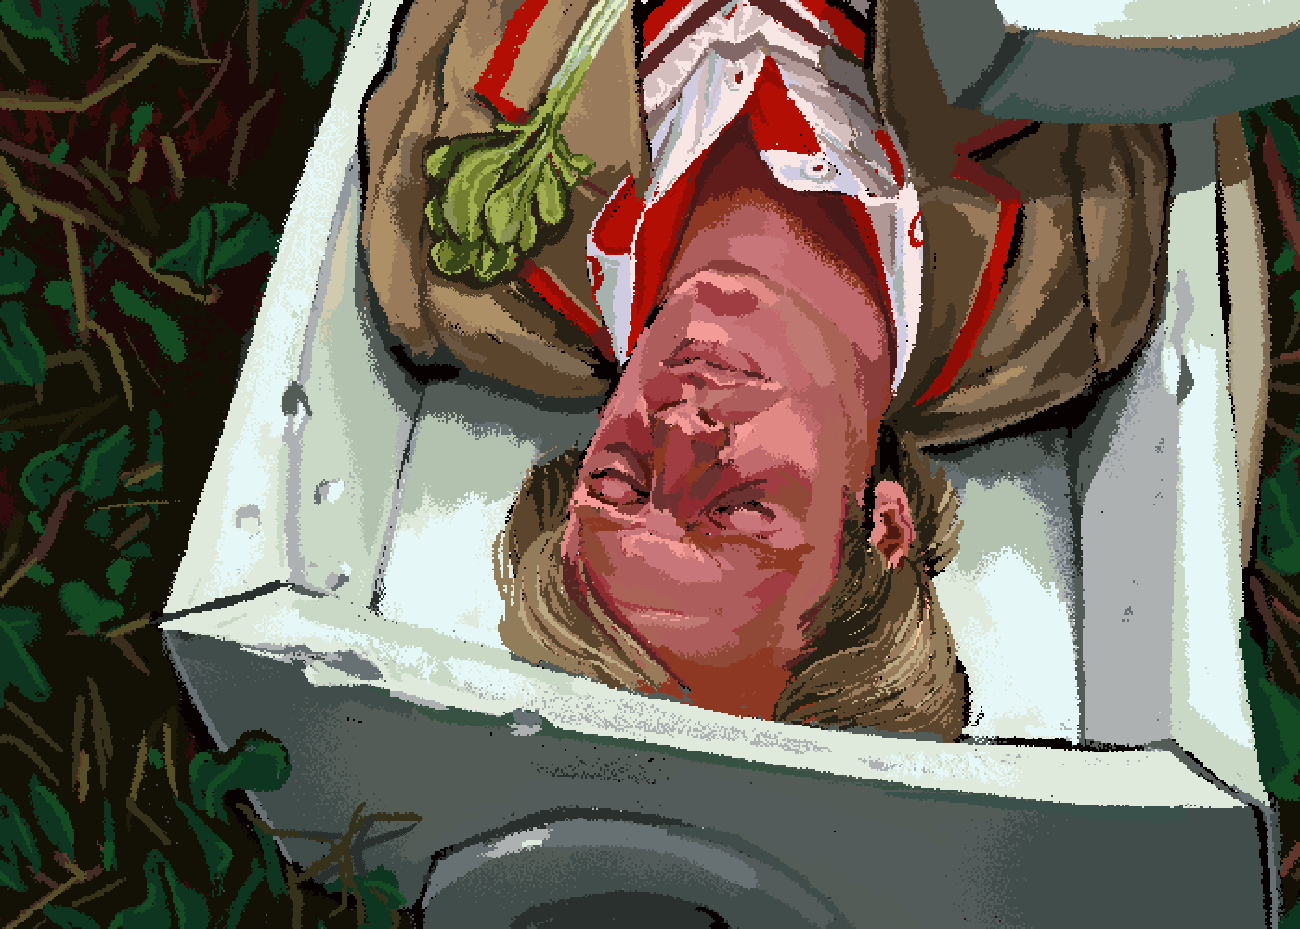 Pixel art of the fifth Doctor from Doctor Who. It shows him lying down in a white box about the size of a coffin called the Zero Cabinet. The lid of the cabinet is off and he appears to be asleep. The cabinet is surrounded by plant life.